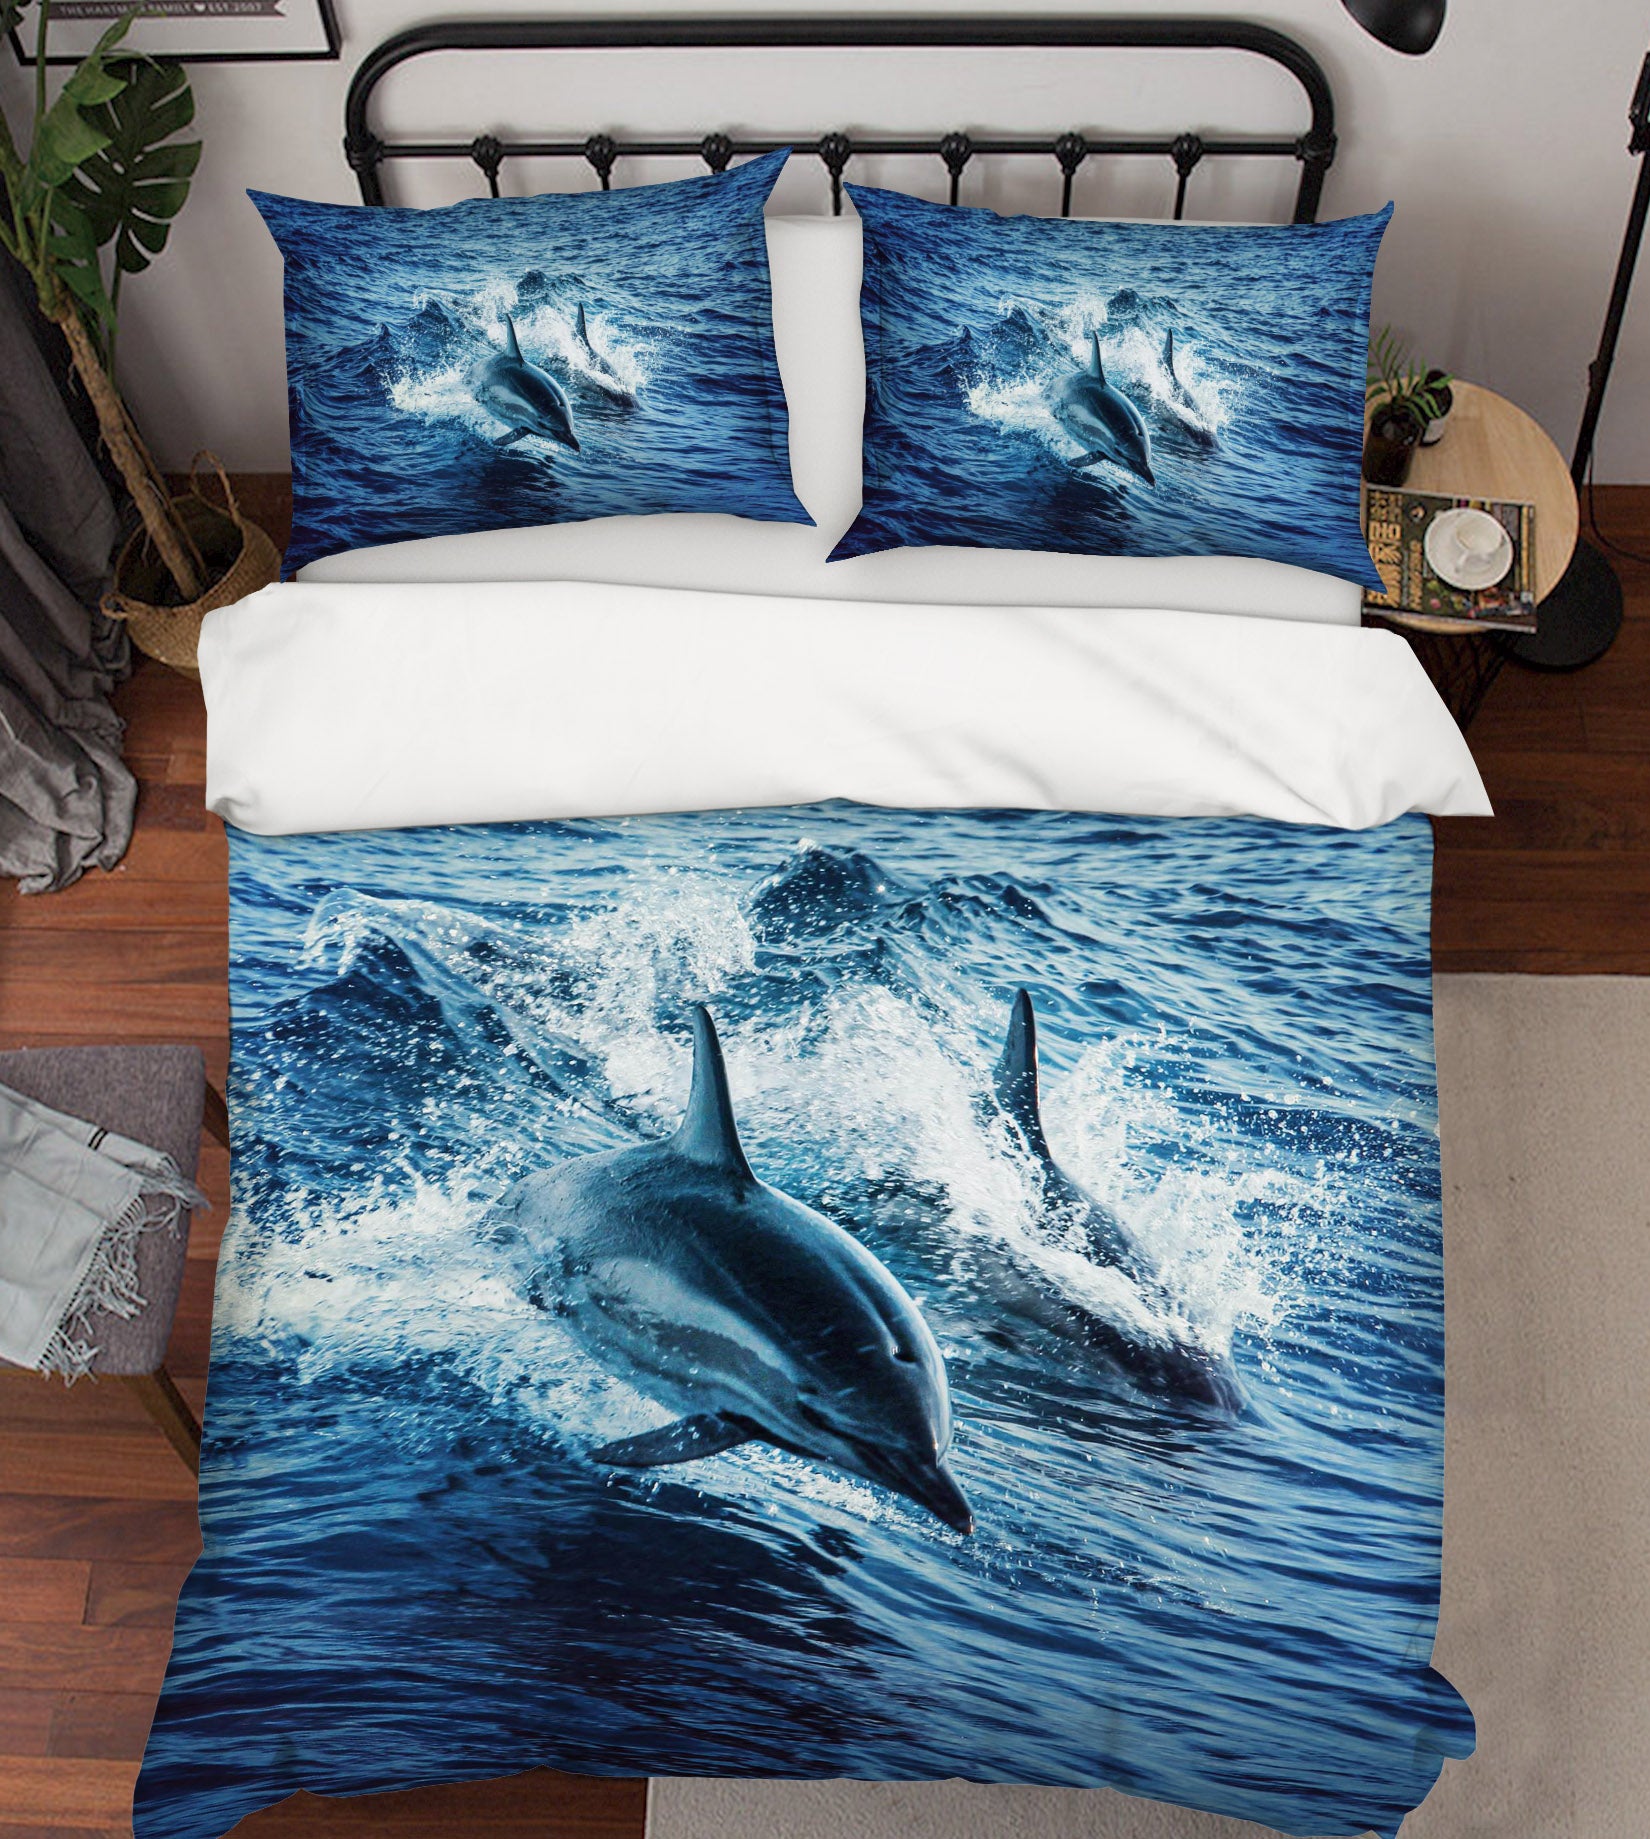 3D Cute Dolphin 1929 Bed Pillowcases Quilt